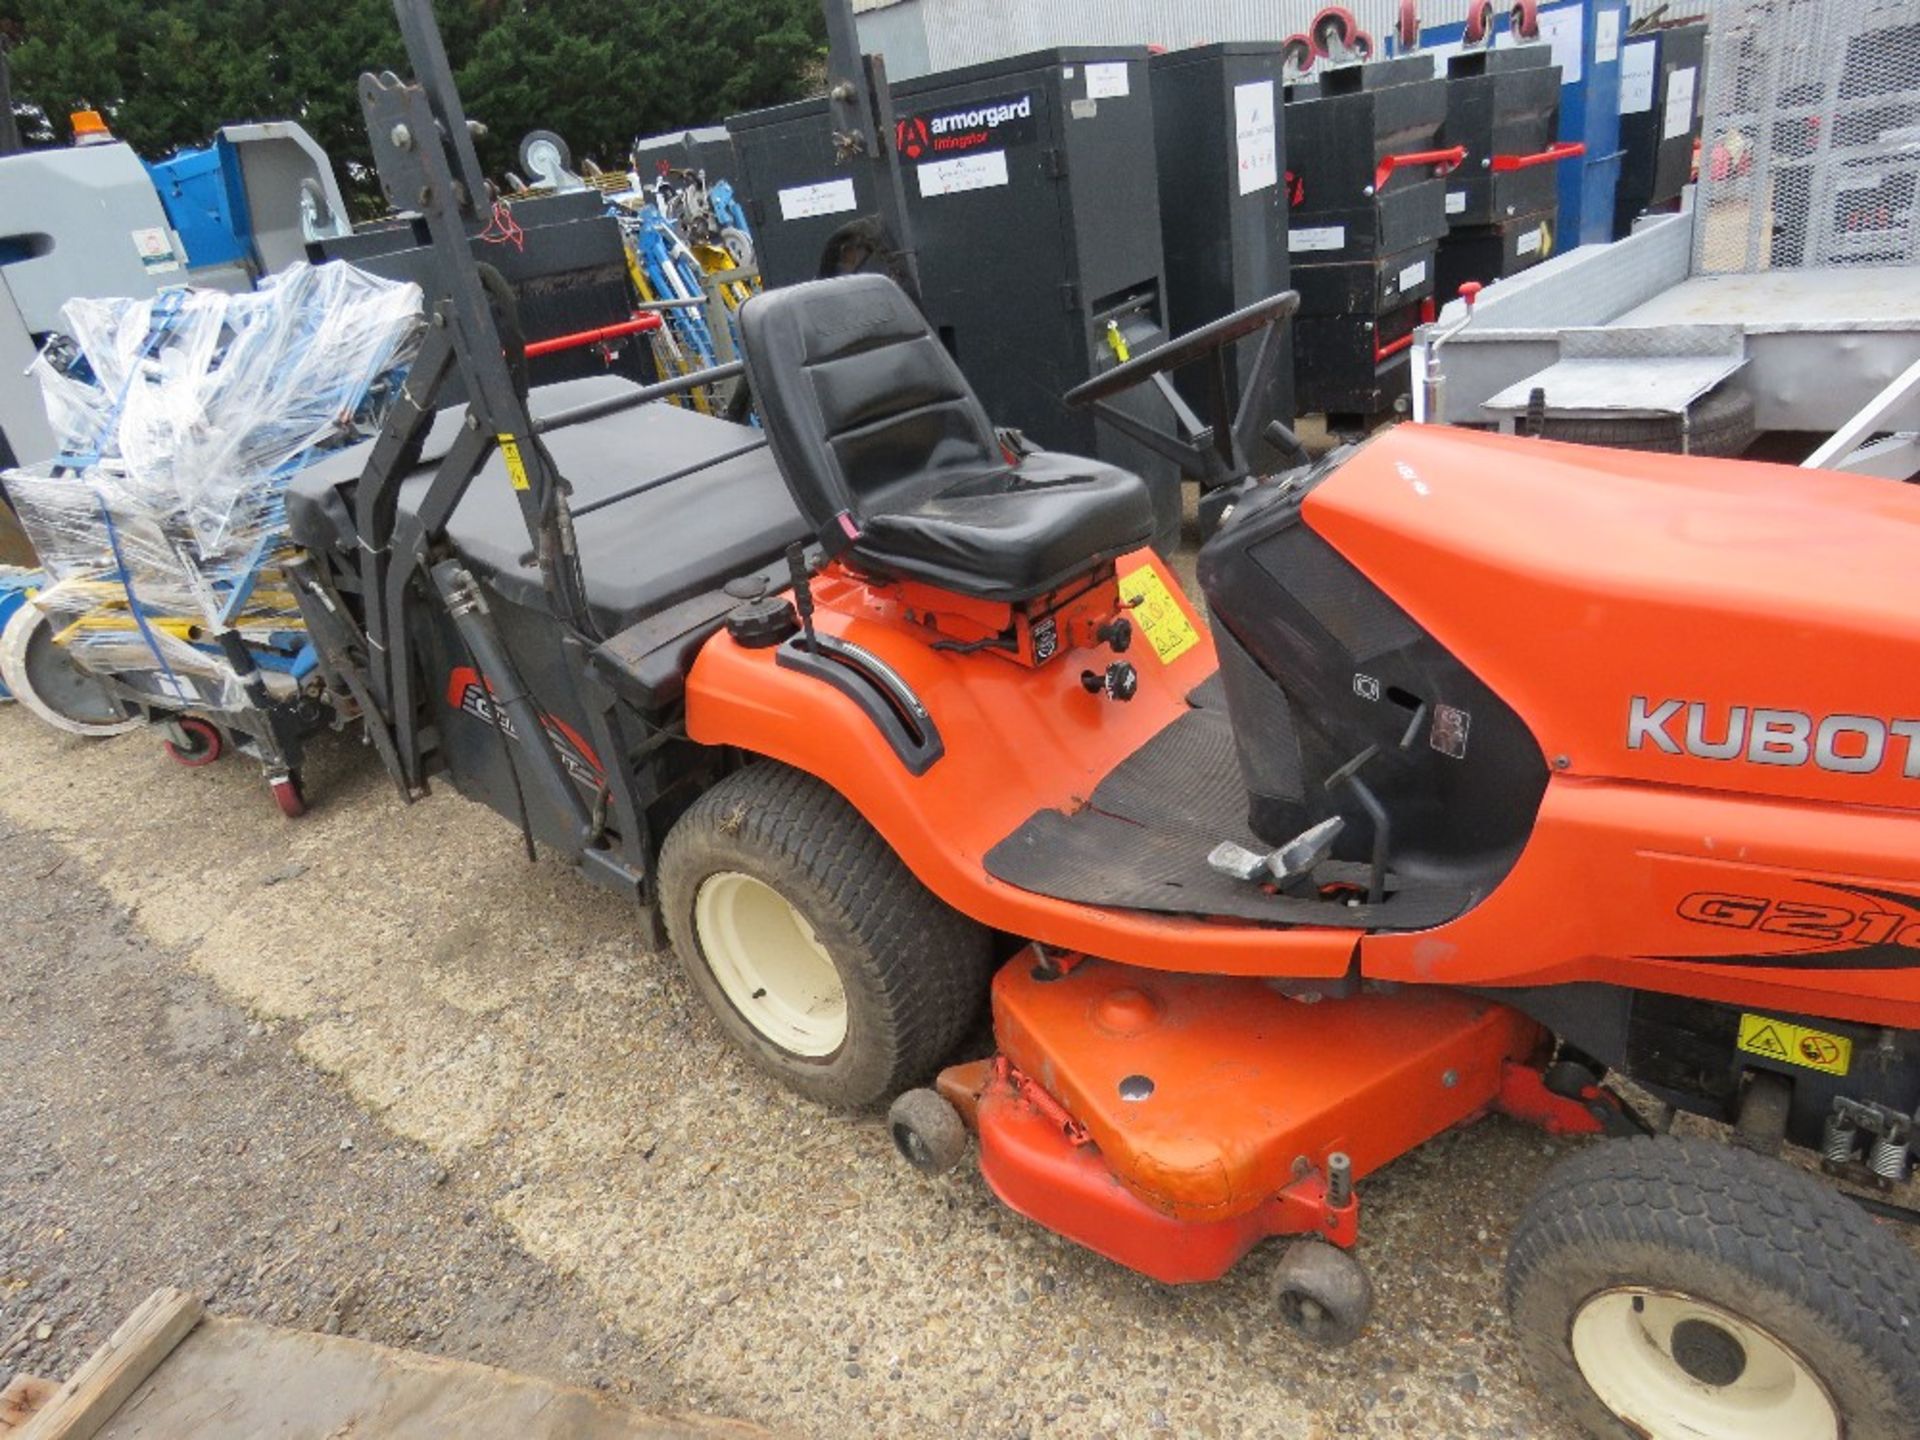 KUBOTA G21E RIDE ON MOWER WITH HIGH DISCHARGE COLLECTOR, YEAR 2014. WHEN TESTED WAS SEEN TO RUN, DRI - Image 7 of 7